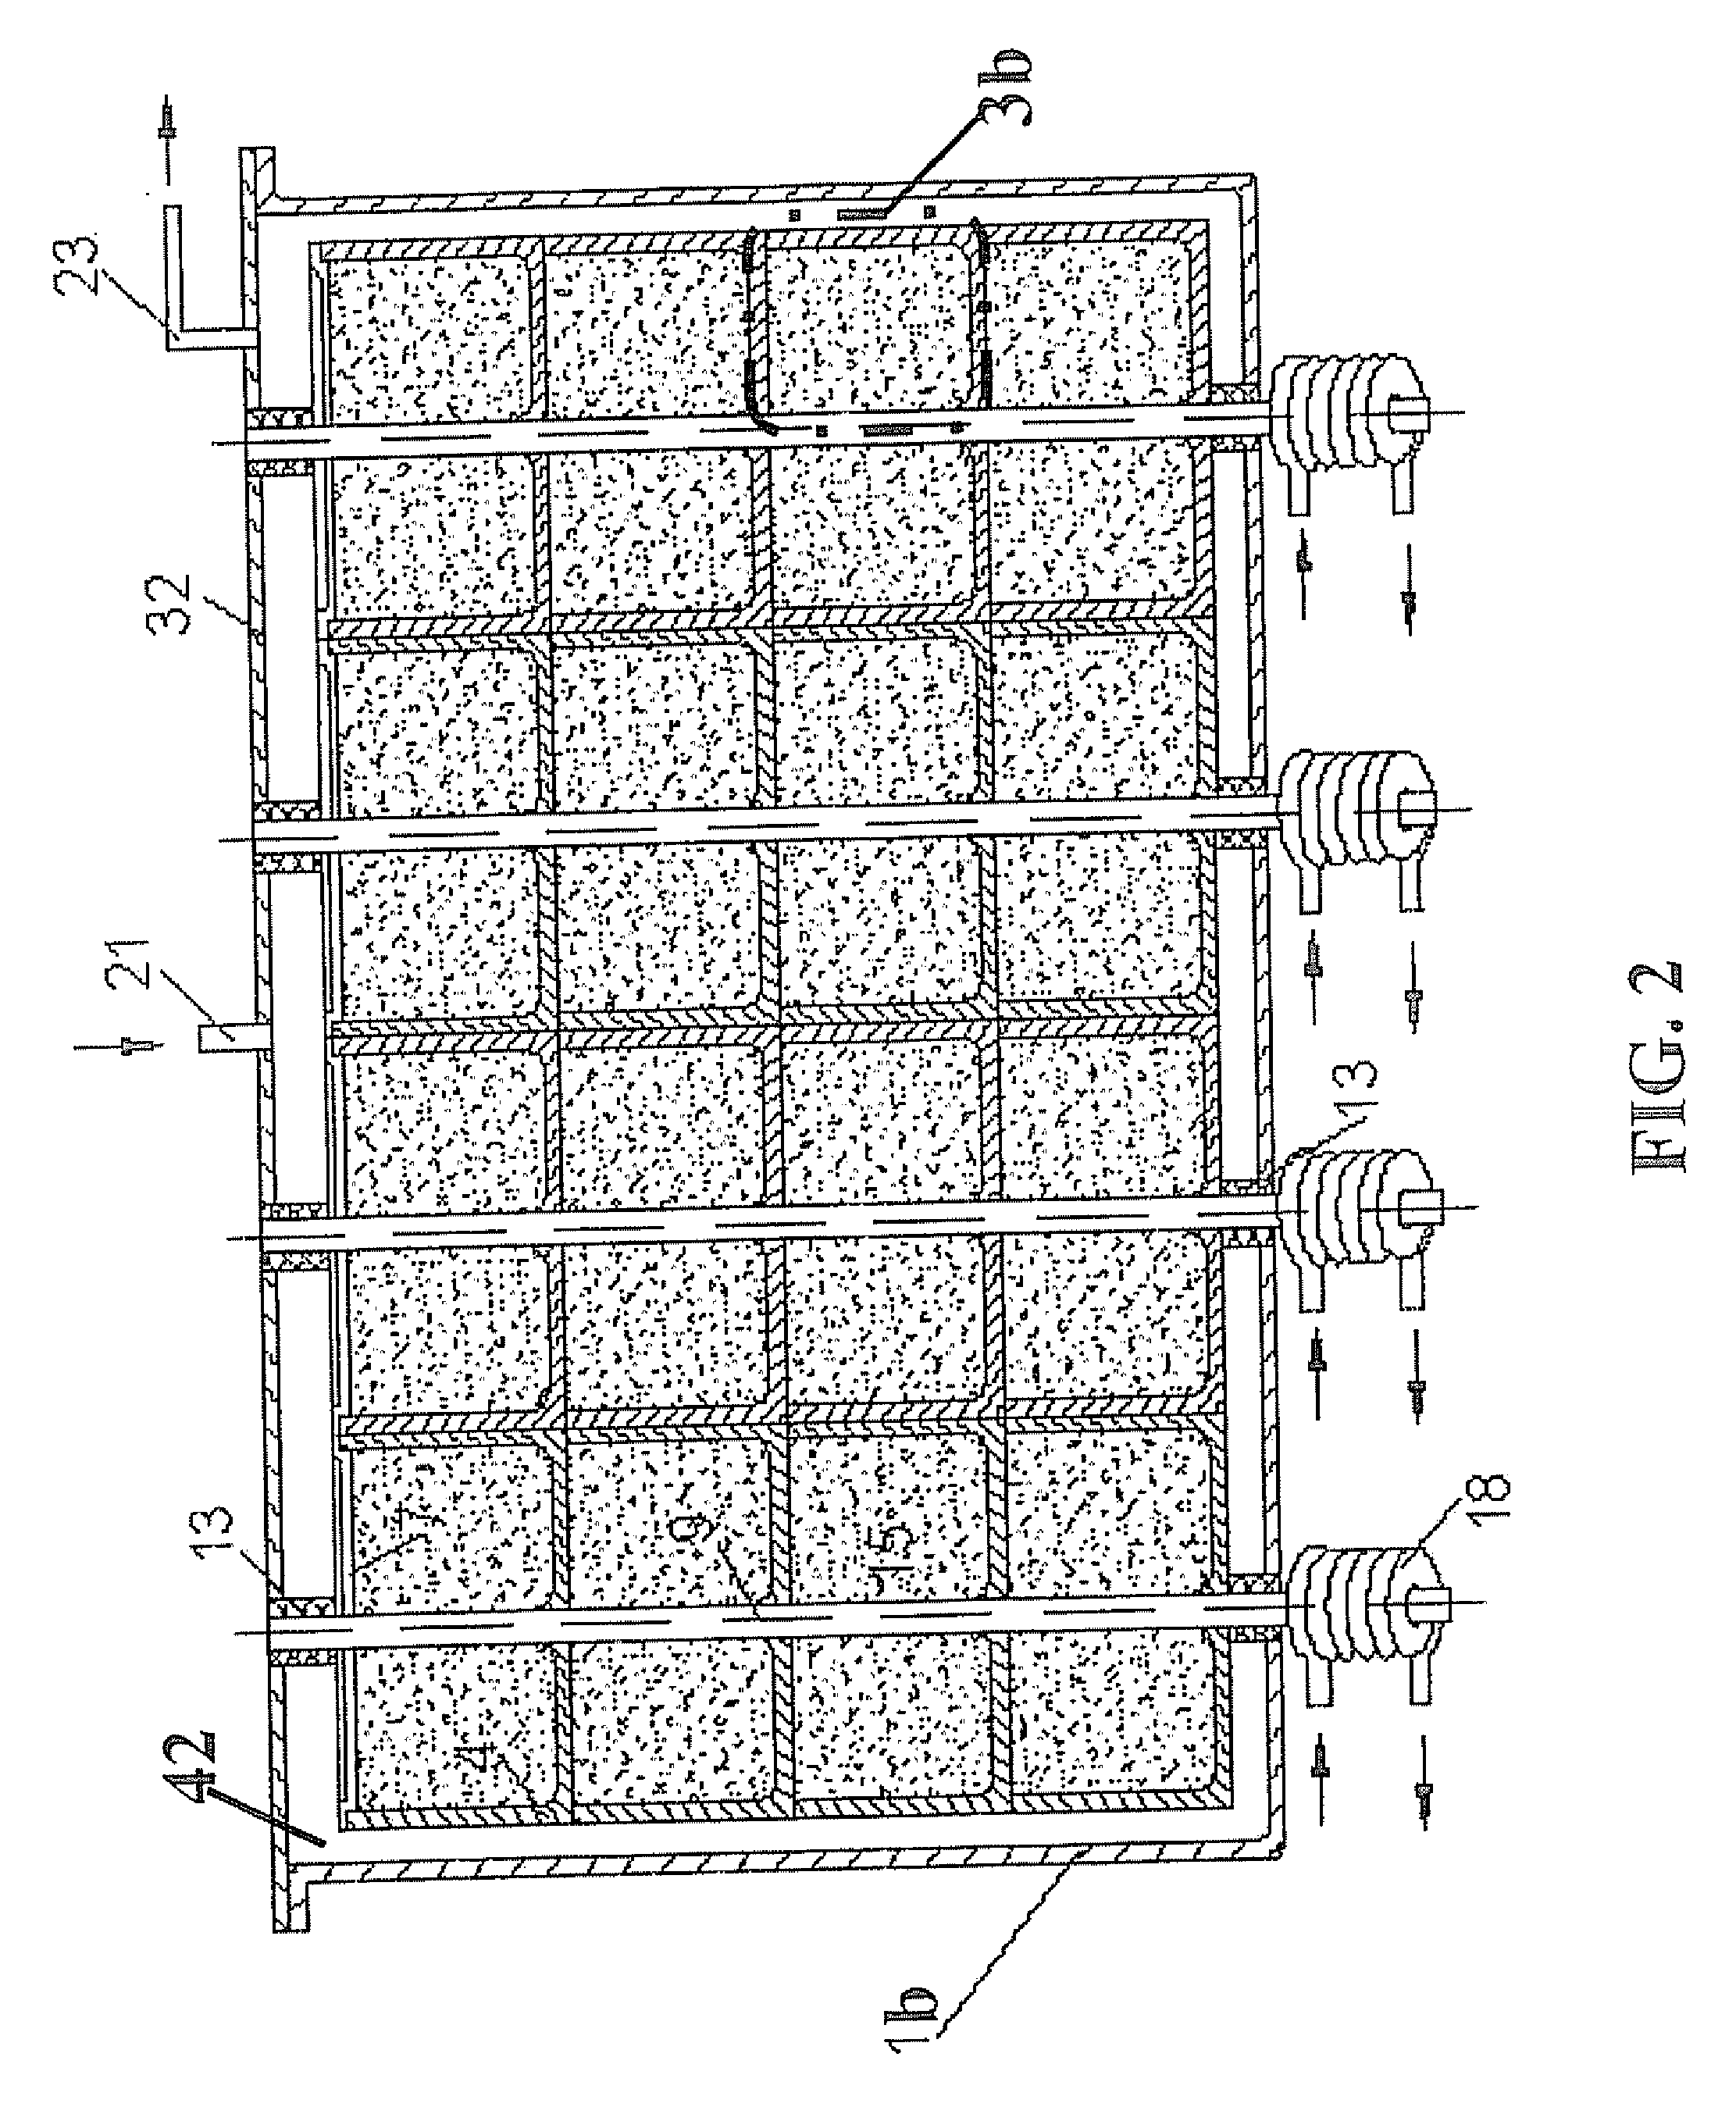 Storage Systems For Adsorbable Gaseous Fuel And Methods Of Producing The Same